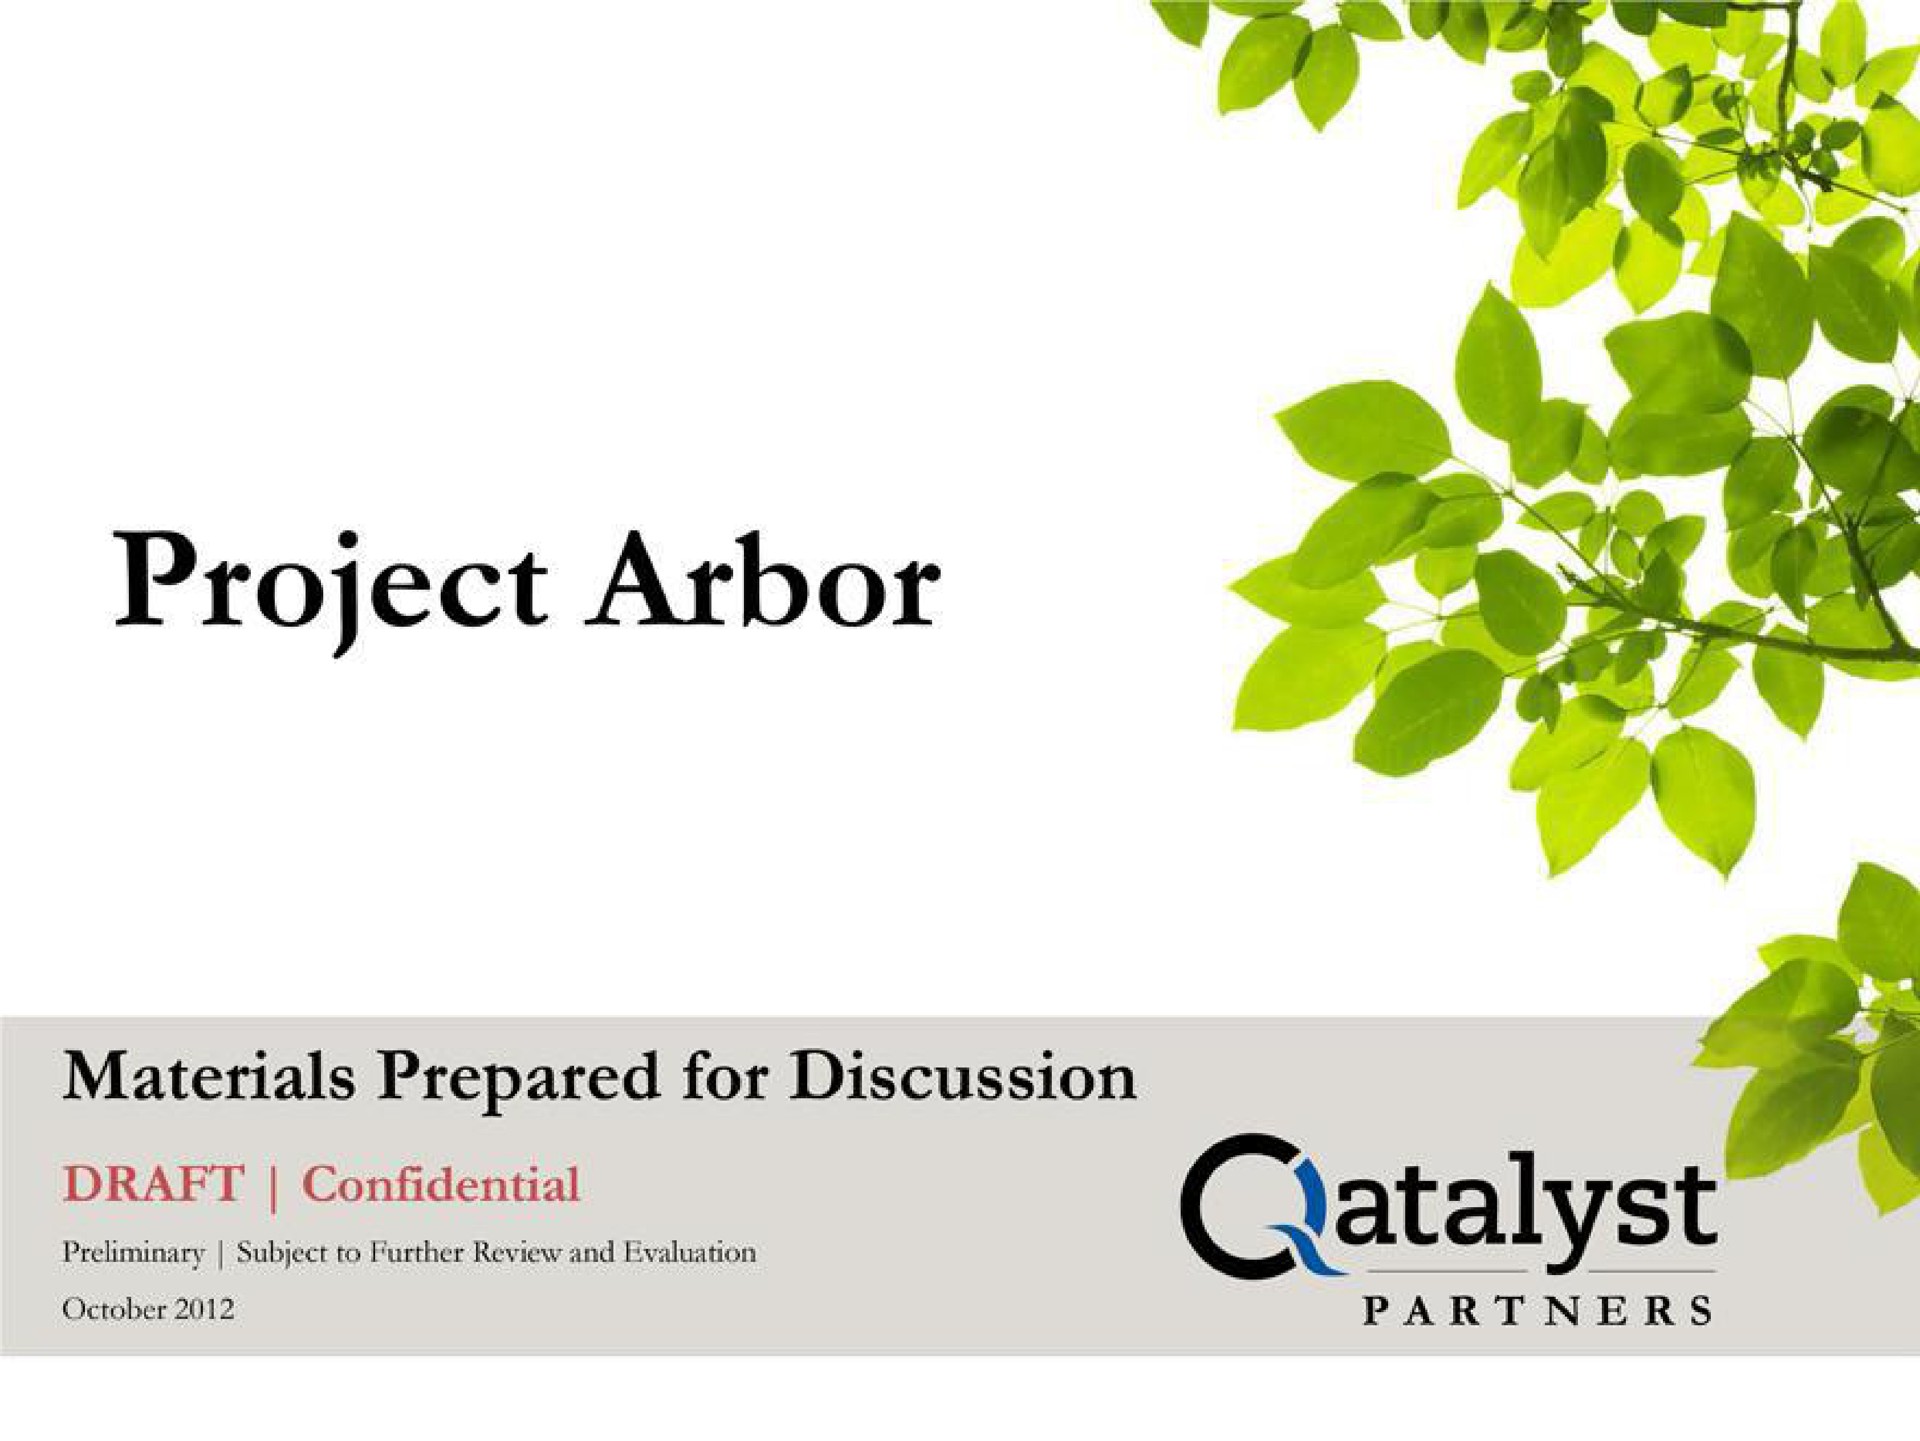 project arbor materials prepared for discussion draft confidential | Qatalyst Partners